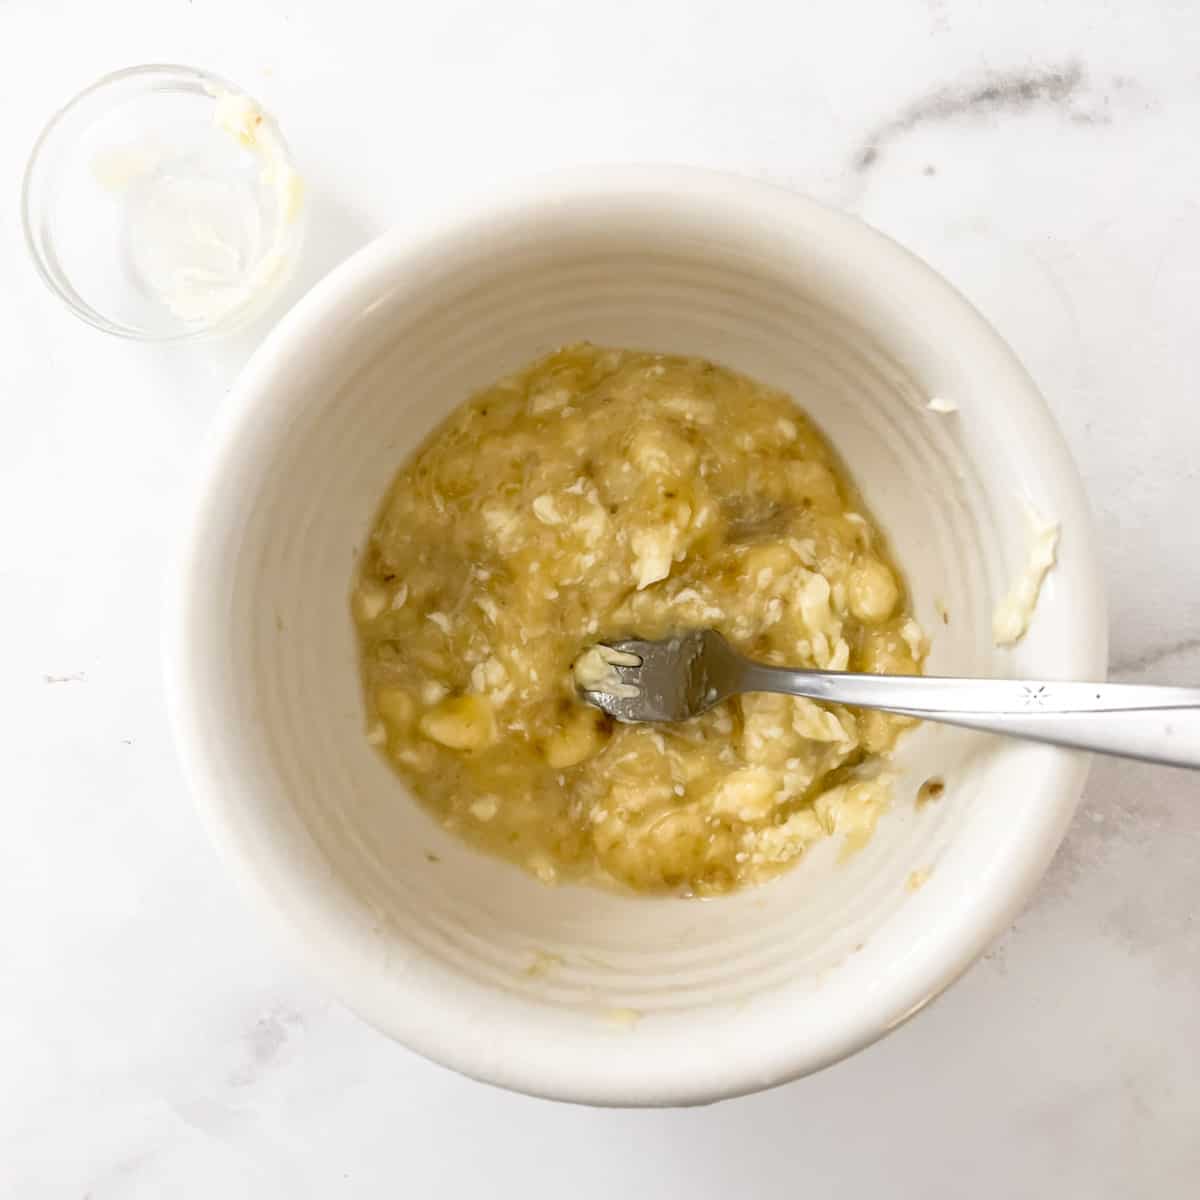 Mashed banana with water and butter in small bowl.